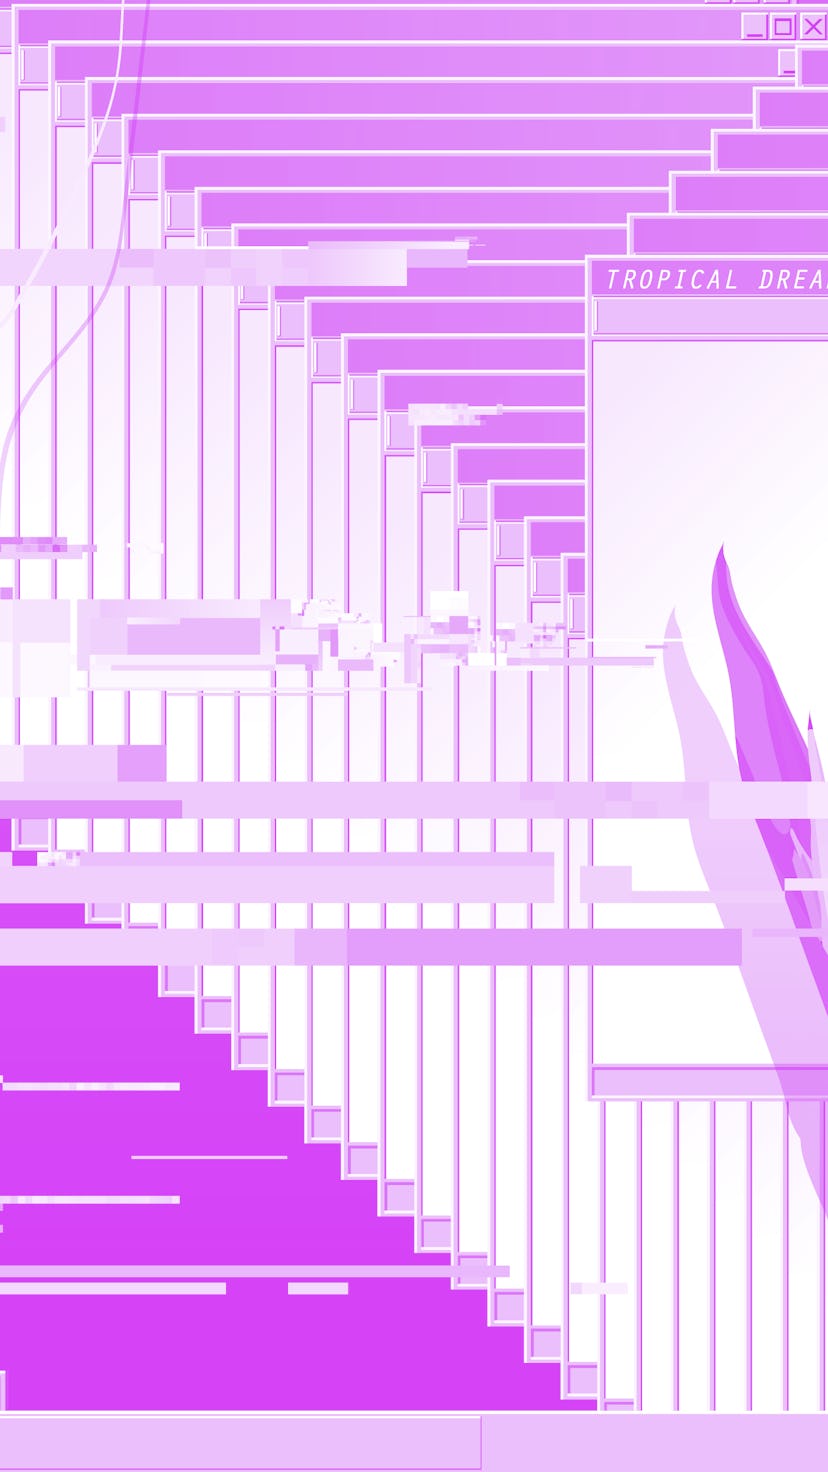 Operation system desktop display glitch and error with tropical bird of paradise flower, vaporwave n...